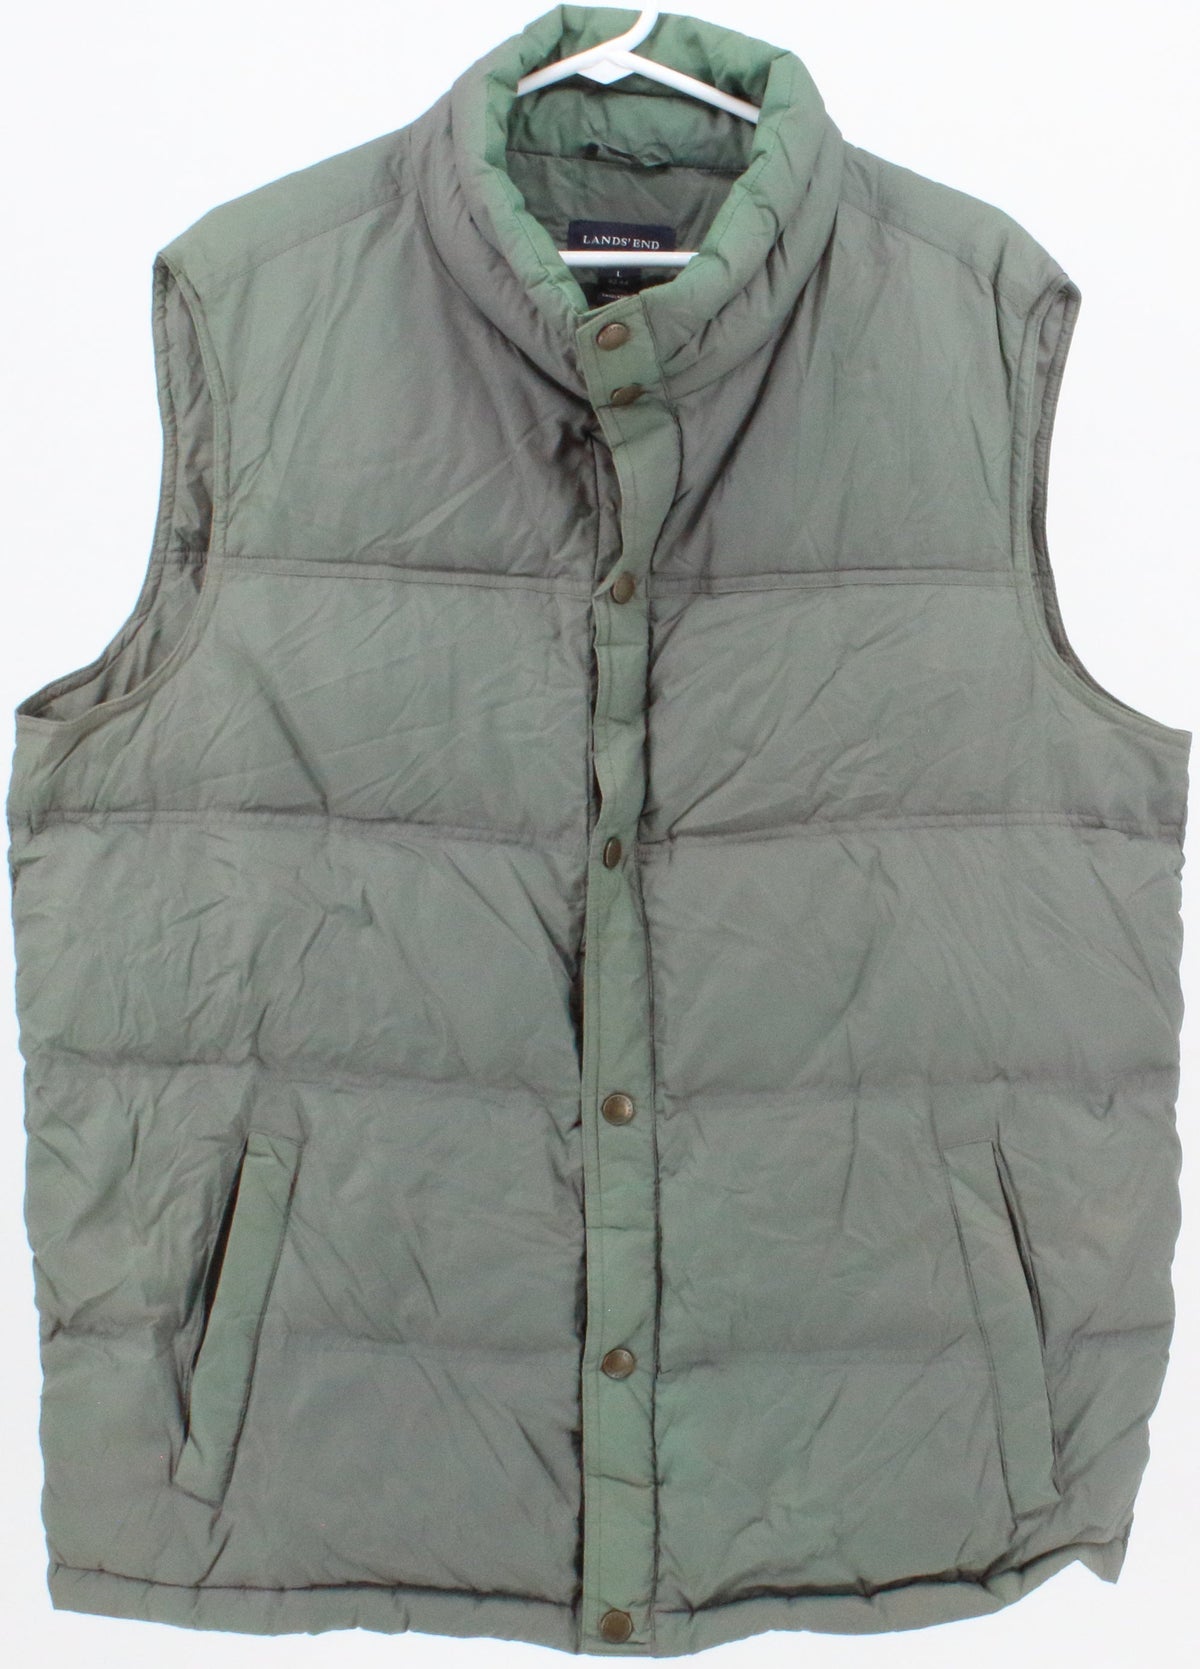 Lands' End Green Insulated Vest